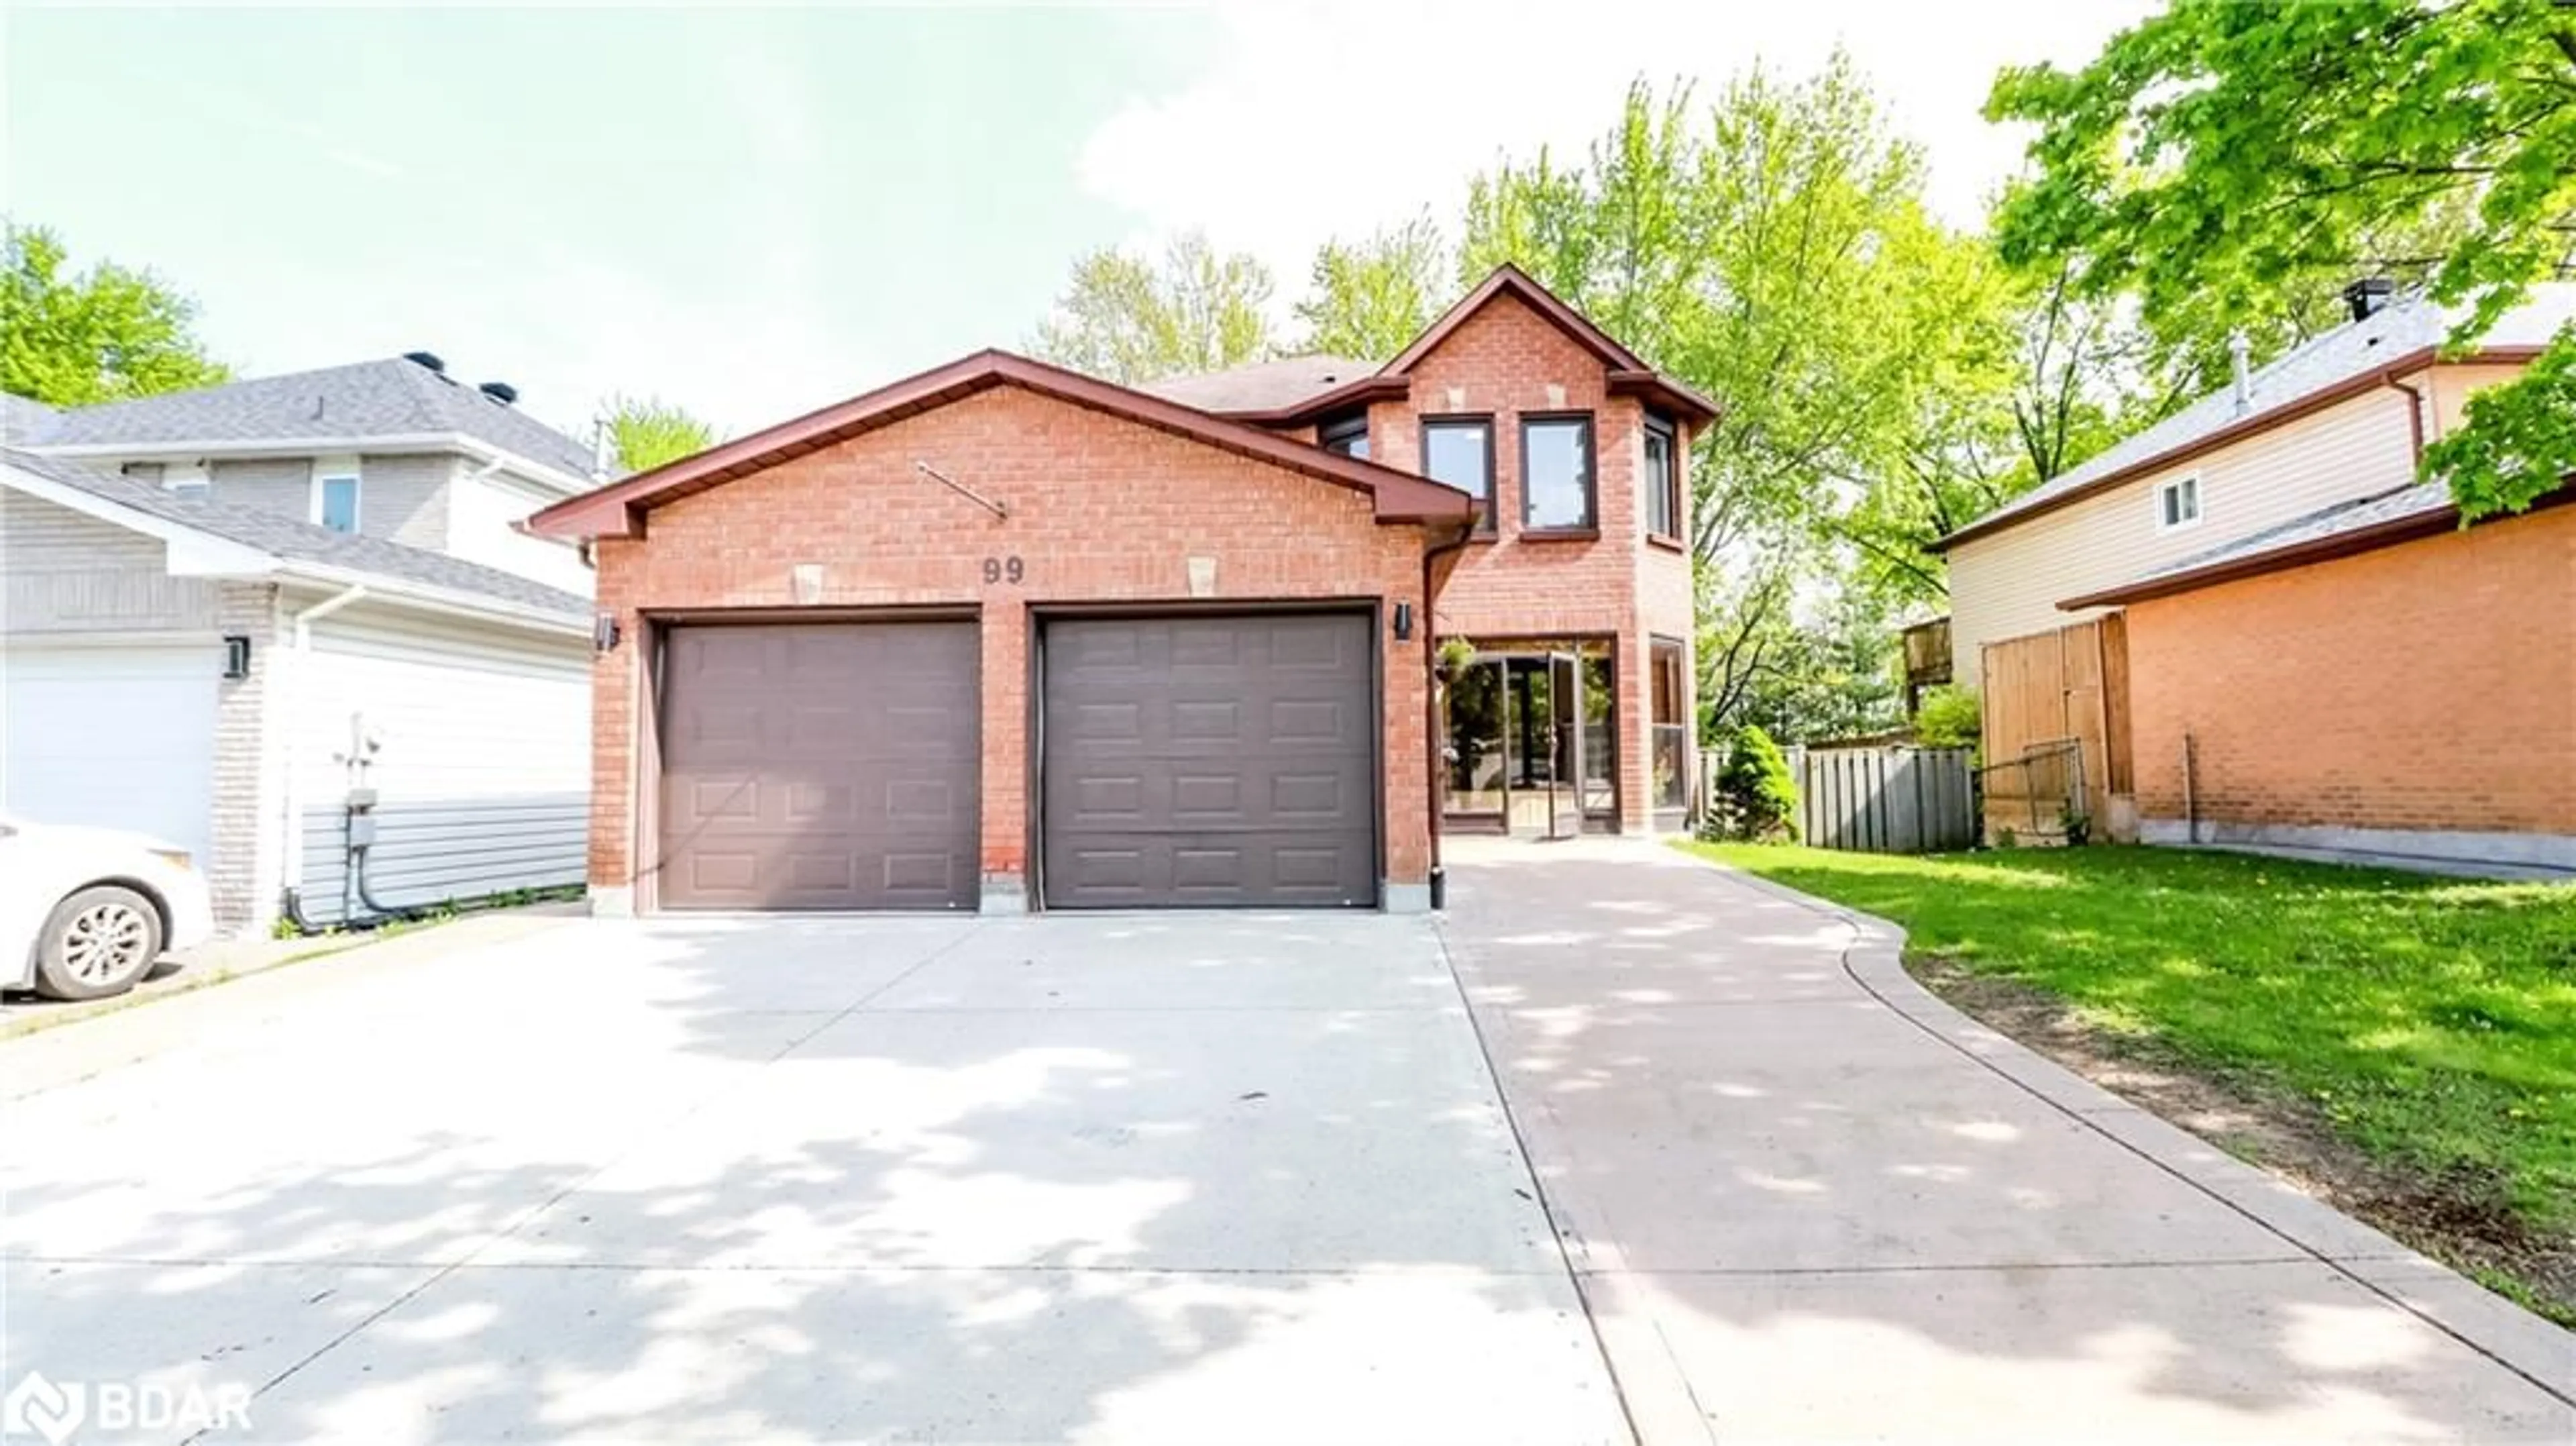 Home with brick exterior material for 99 Browning Trail, Barrie Ontario L4N 6J4